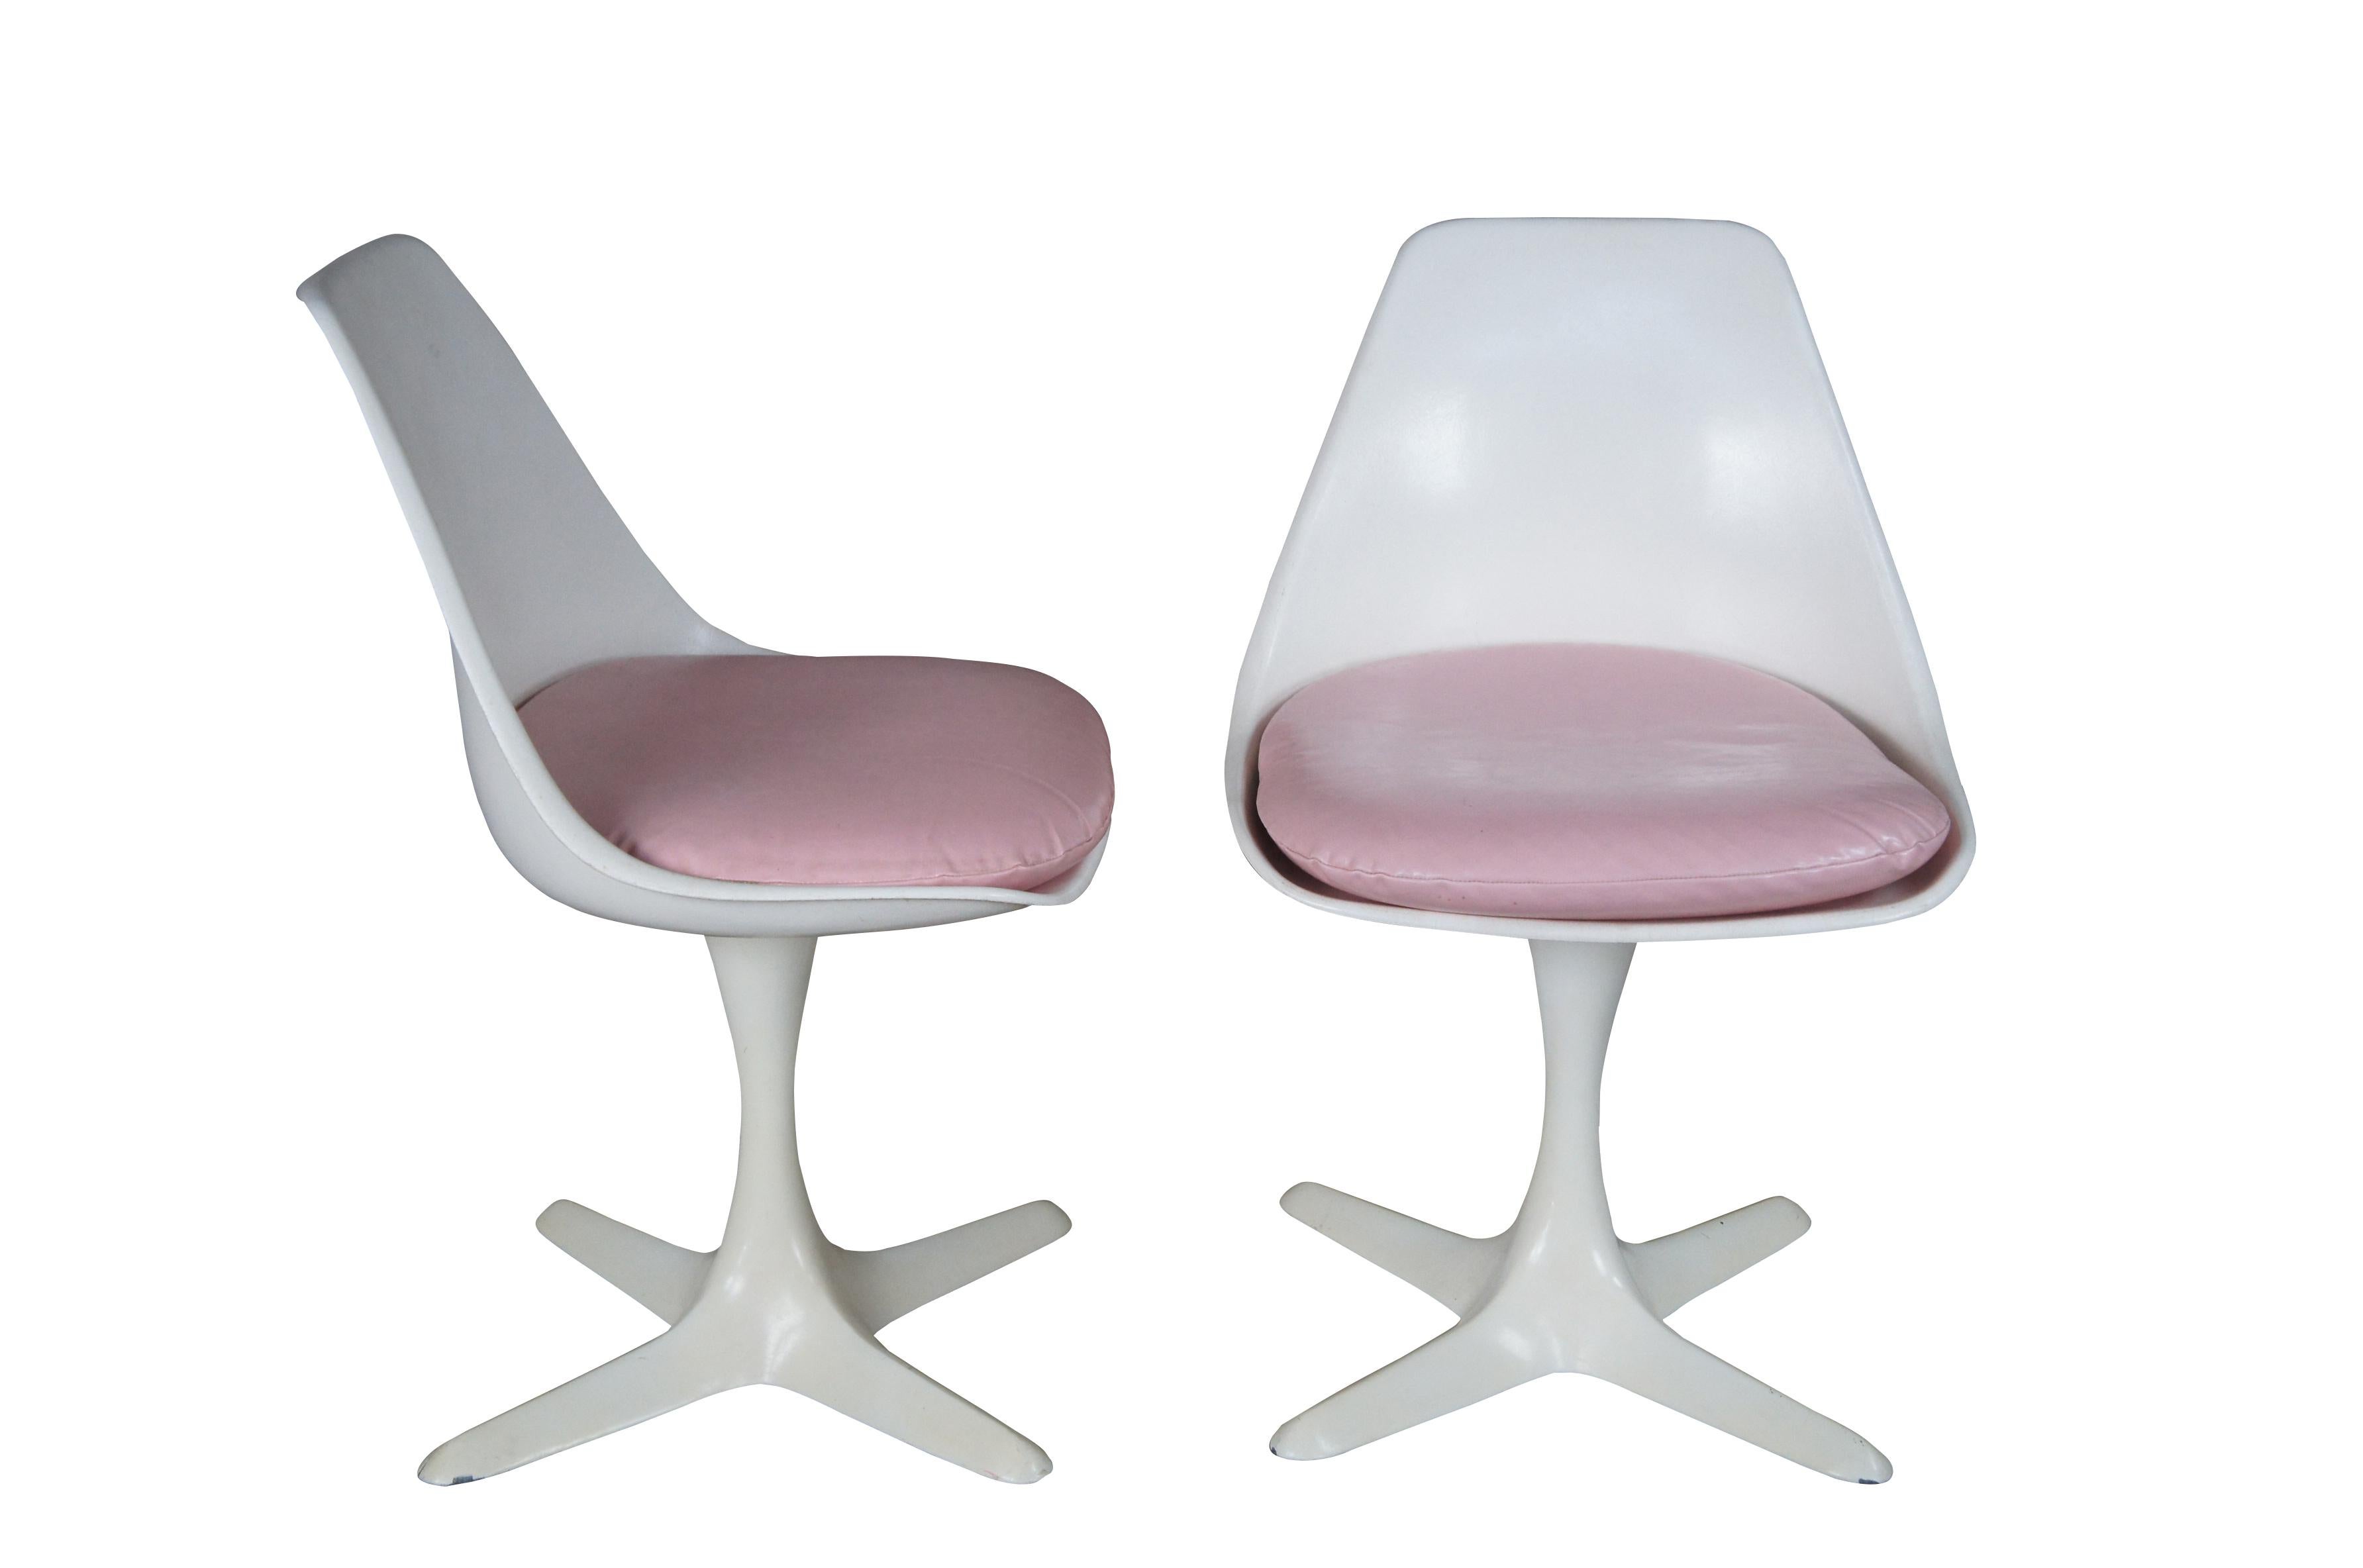 Four original mid century Burke Inc. tulip shell chairs featuring the iconic star design in white with pink vinyl cushions.  Made in Dallas Texas.  Model 115 of the Star Trek series.

Burke Inc. (1959 - 1963)
Maurice’s first successful solo venture,